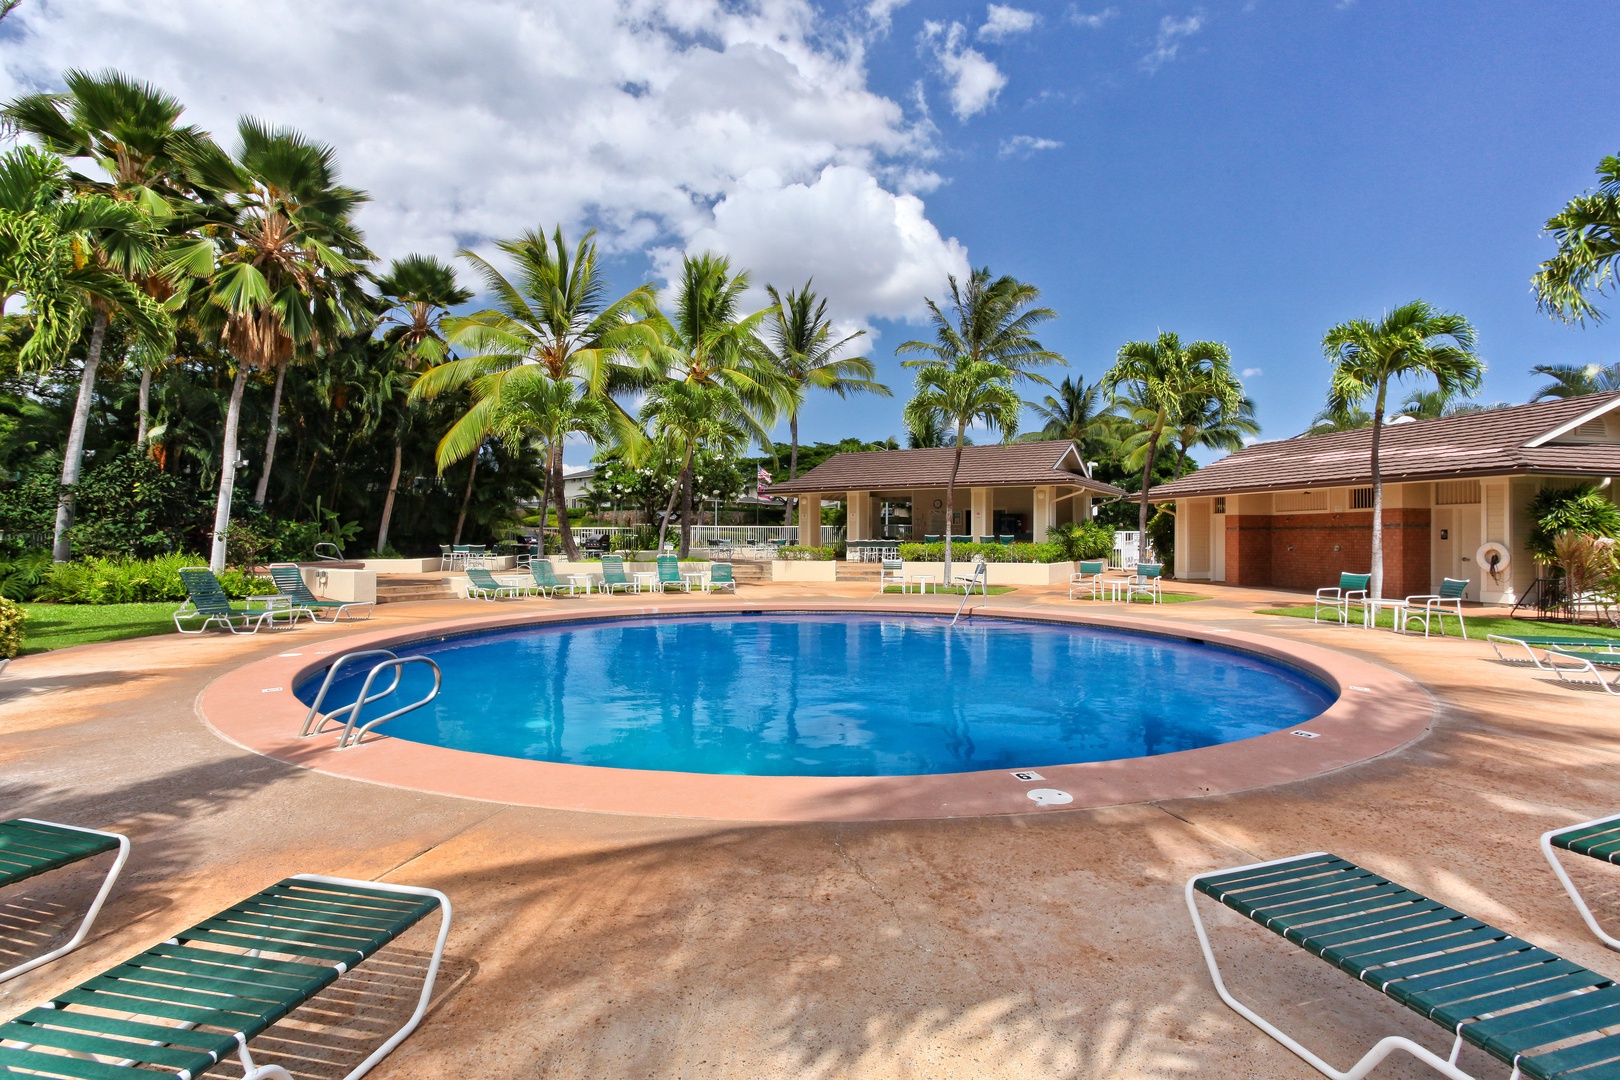 Kapolei Vacation Rentals, Fairways at Ko Olina 22H - Go for a swim in the sparkling waters and rest in the lounge chairs.